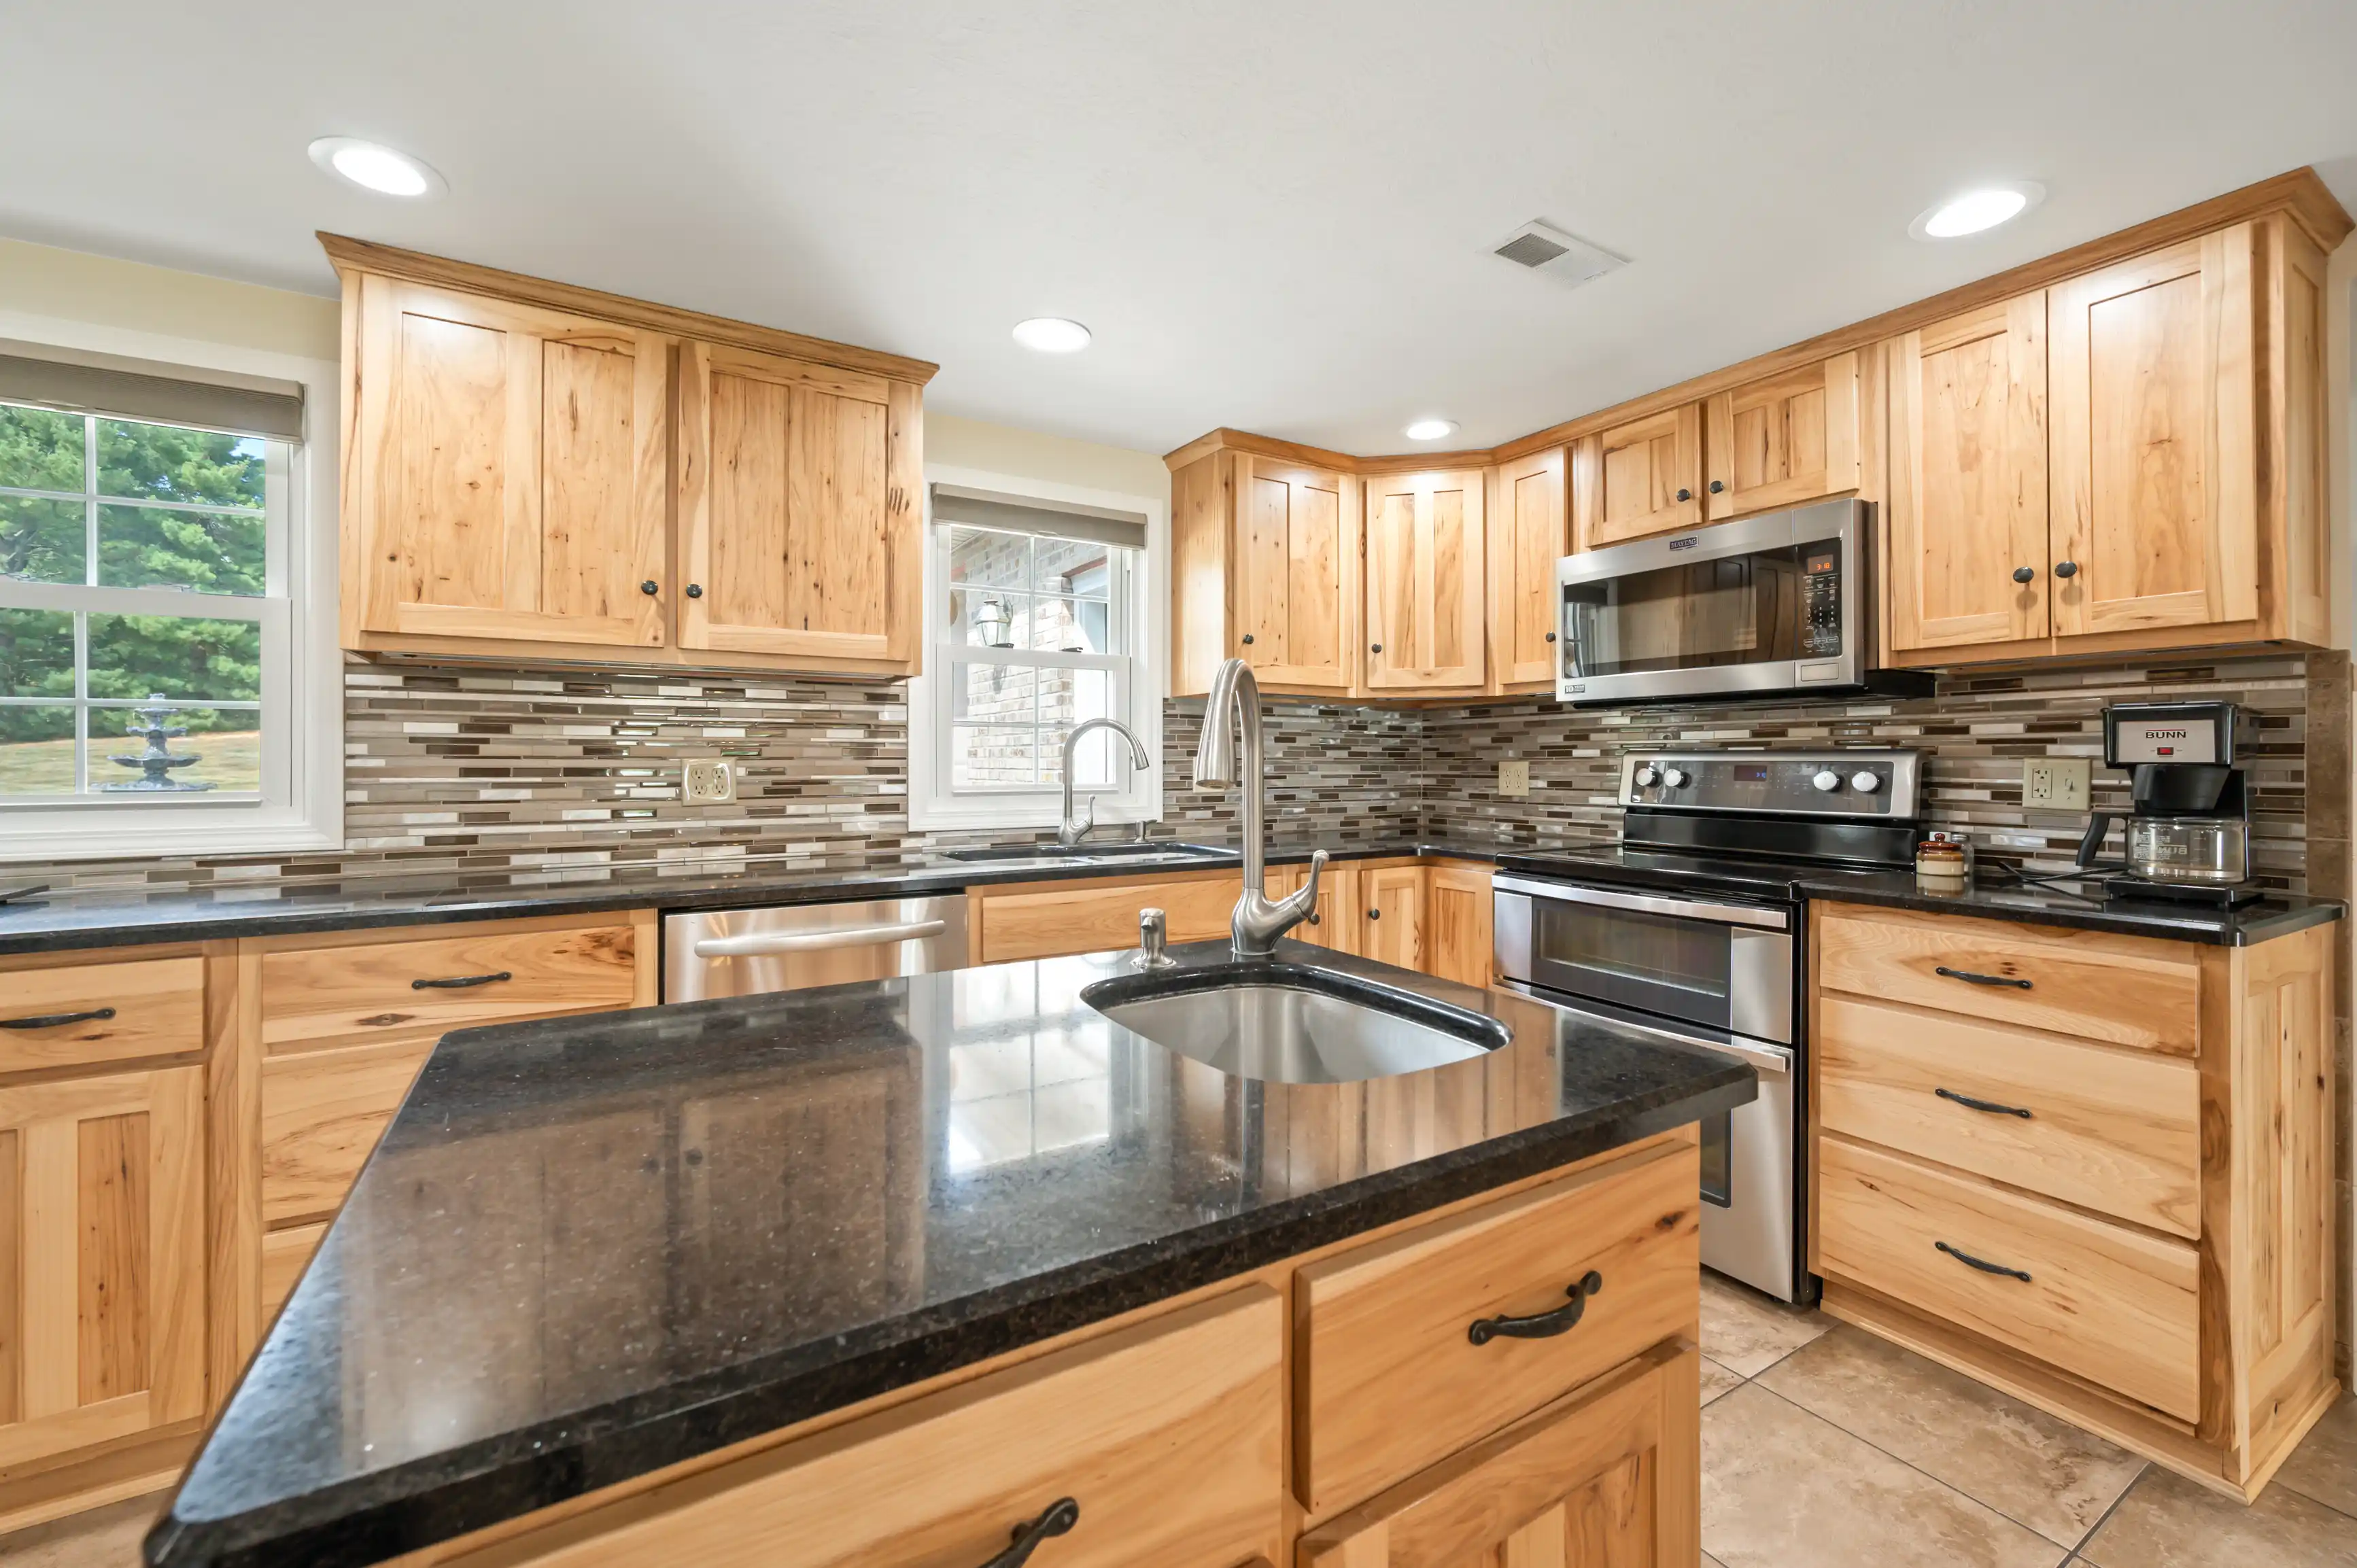 Bright, spacious kitchen with natural wood cabinets, stainless steel appliances, and a tiled backsplash.